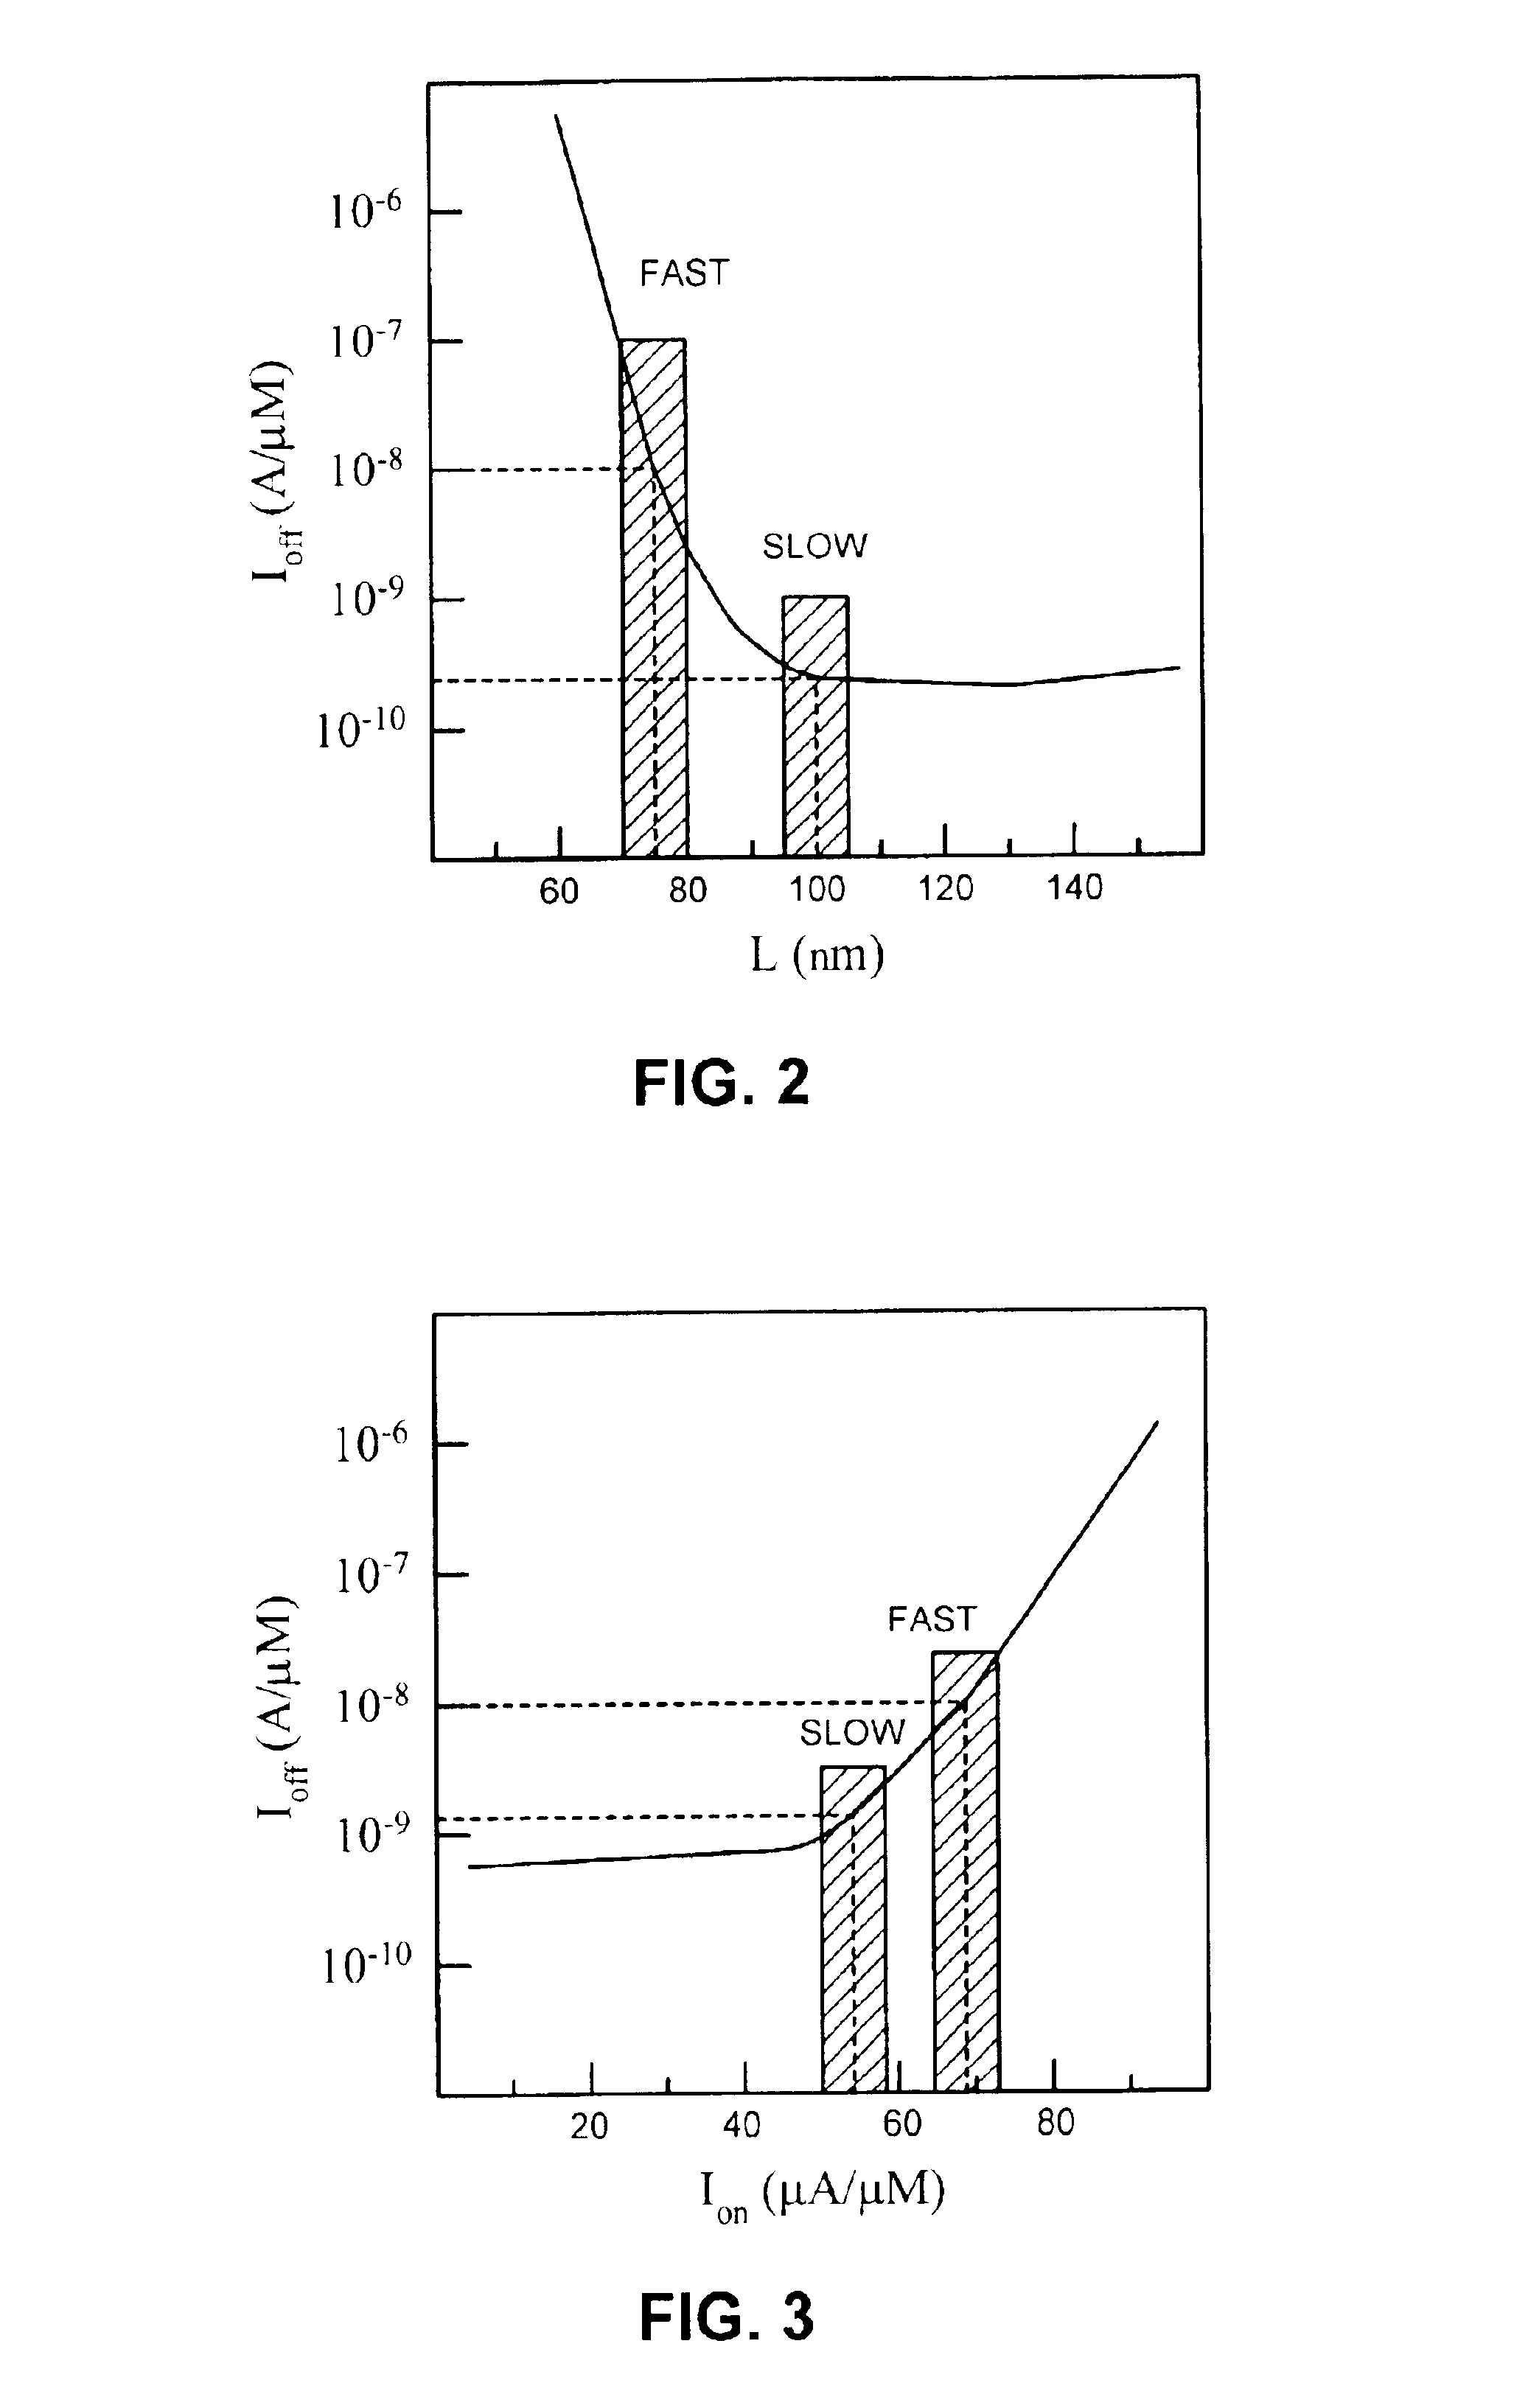 Selectively applying resolution enhancement techniques to improve performance and manufacturing cost of integrated circuits